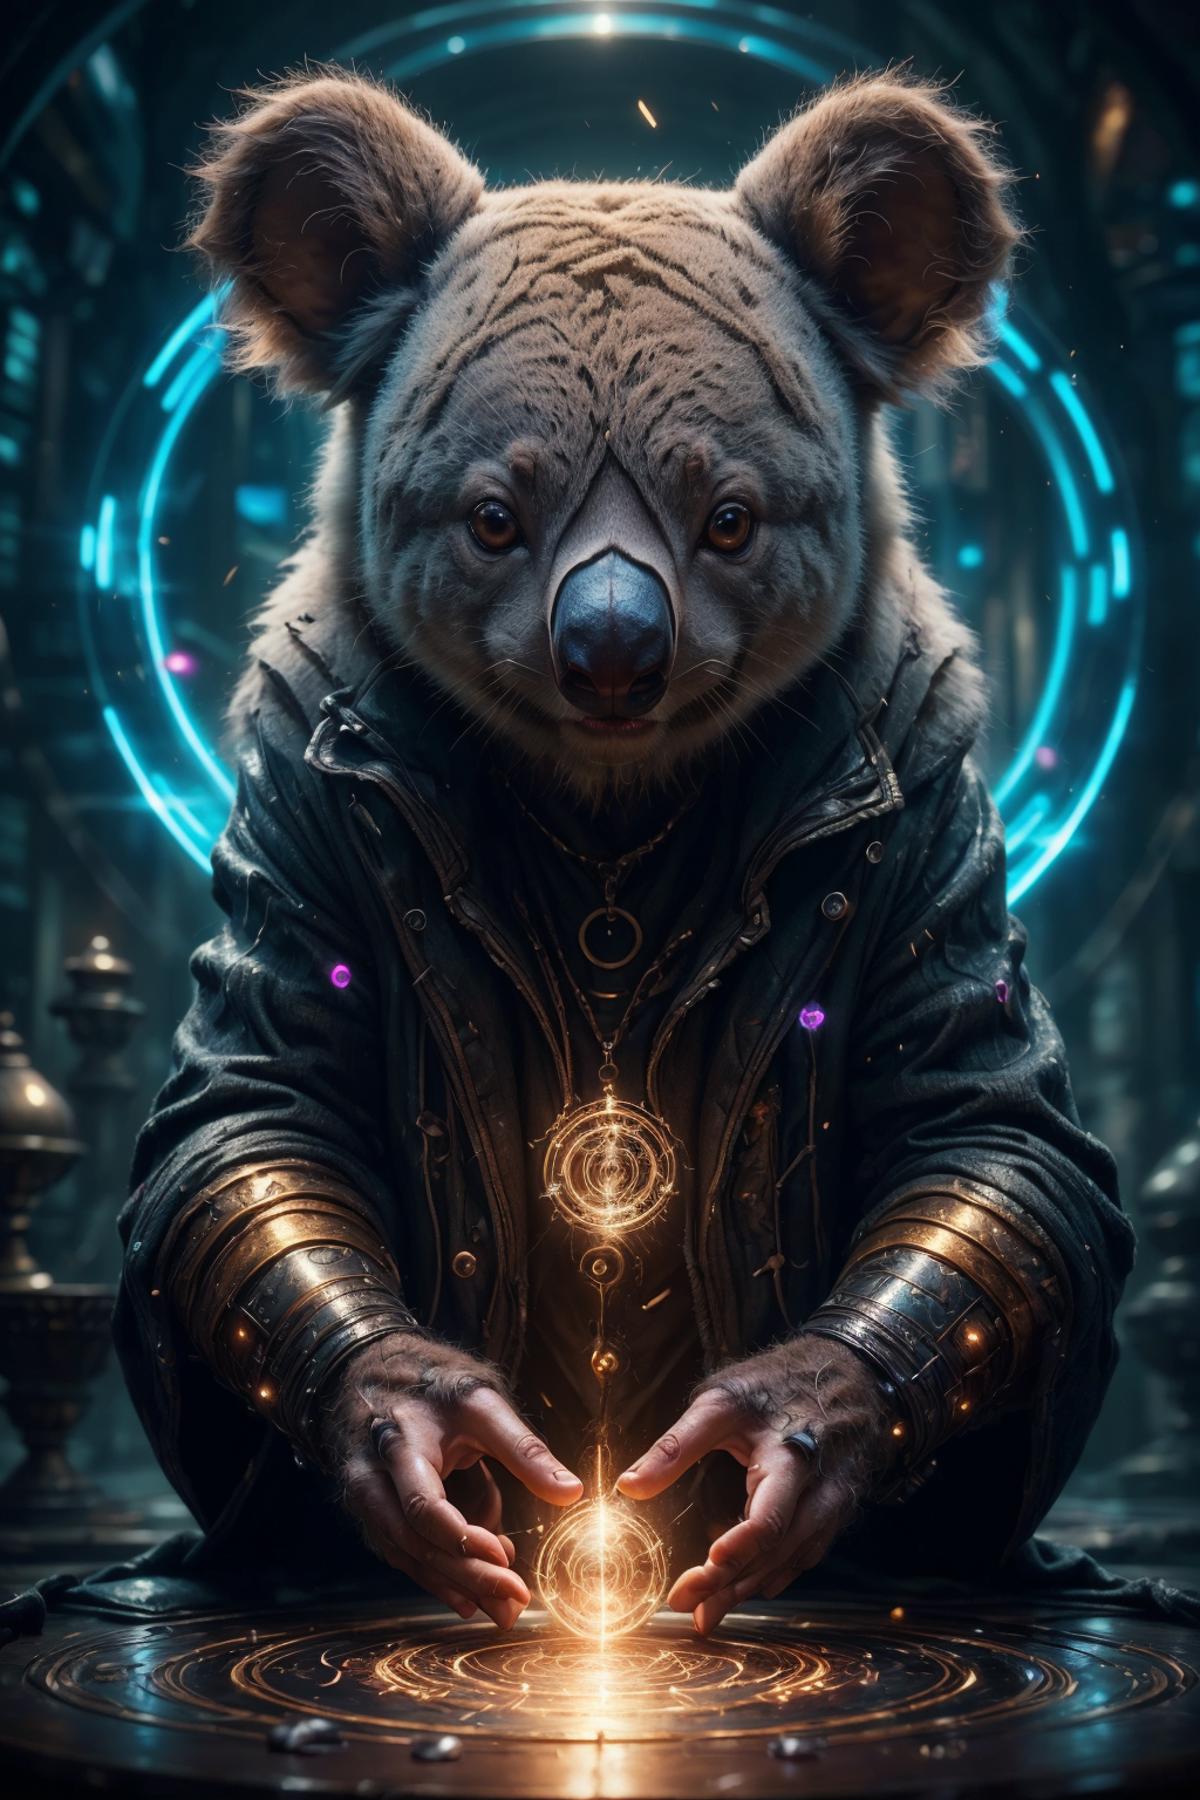 Cyber Wizard image by impossiblebearcl4060